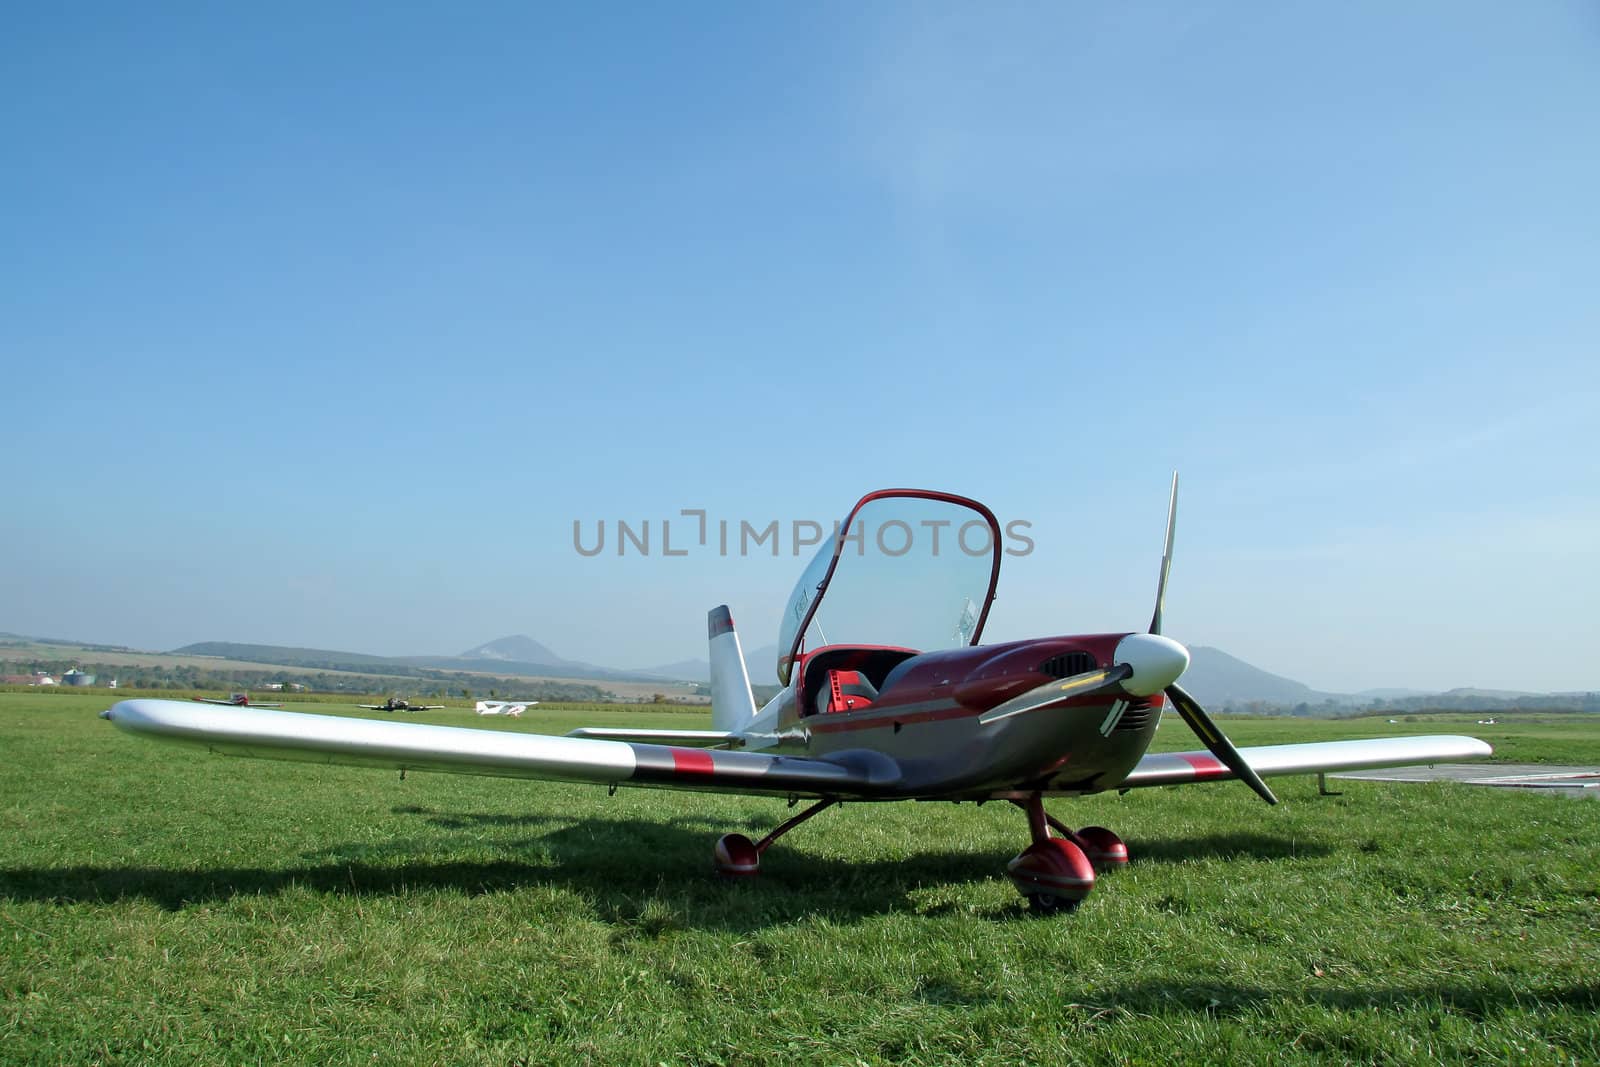 small private airplane, cockpit open, grass airfield